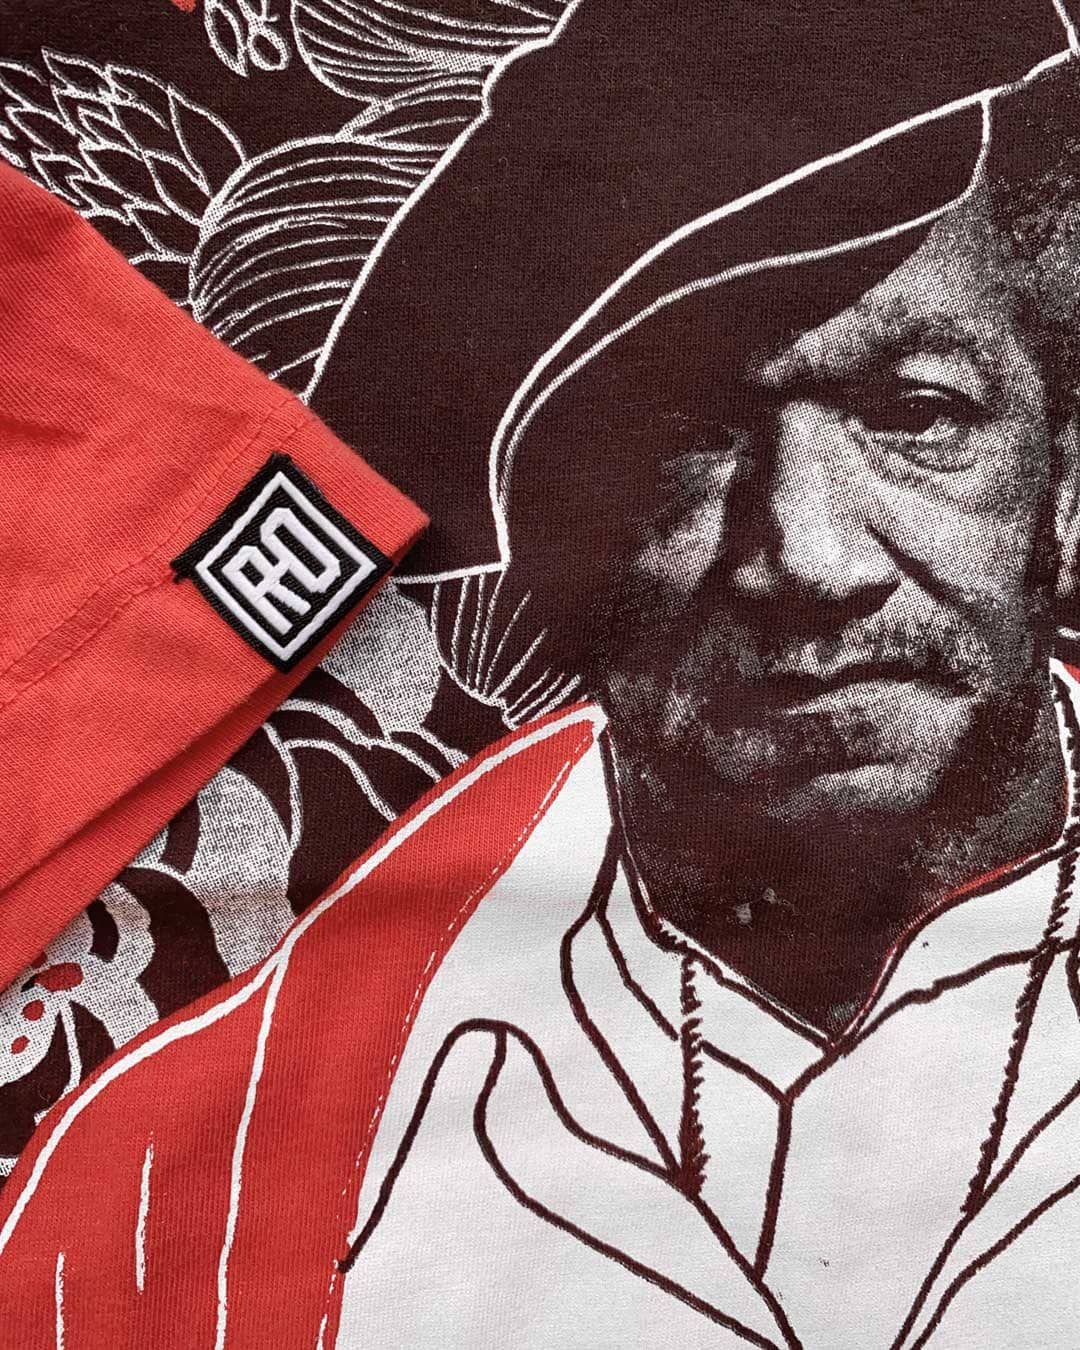 Redd Foxx Vintage Red Cover Photo Tee - Roots of Inc dba Roots of Fight